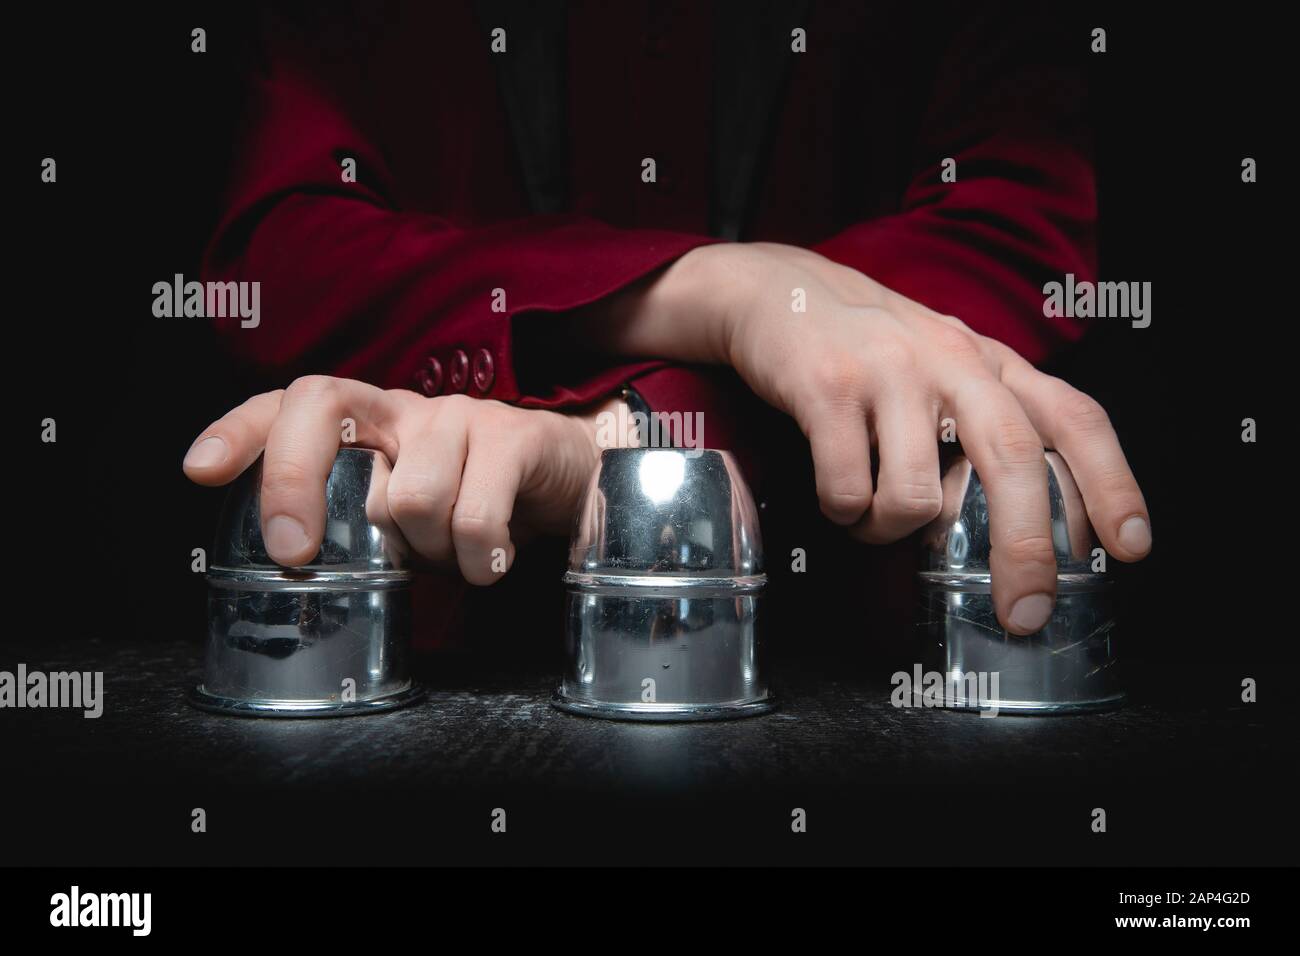 Magician shows shell game of thimbles with circles and ball, black background. Concept deception, sleight hand Stock Photo